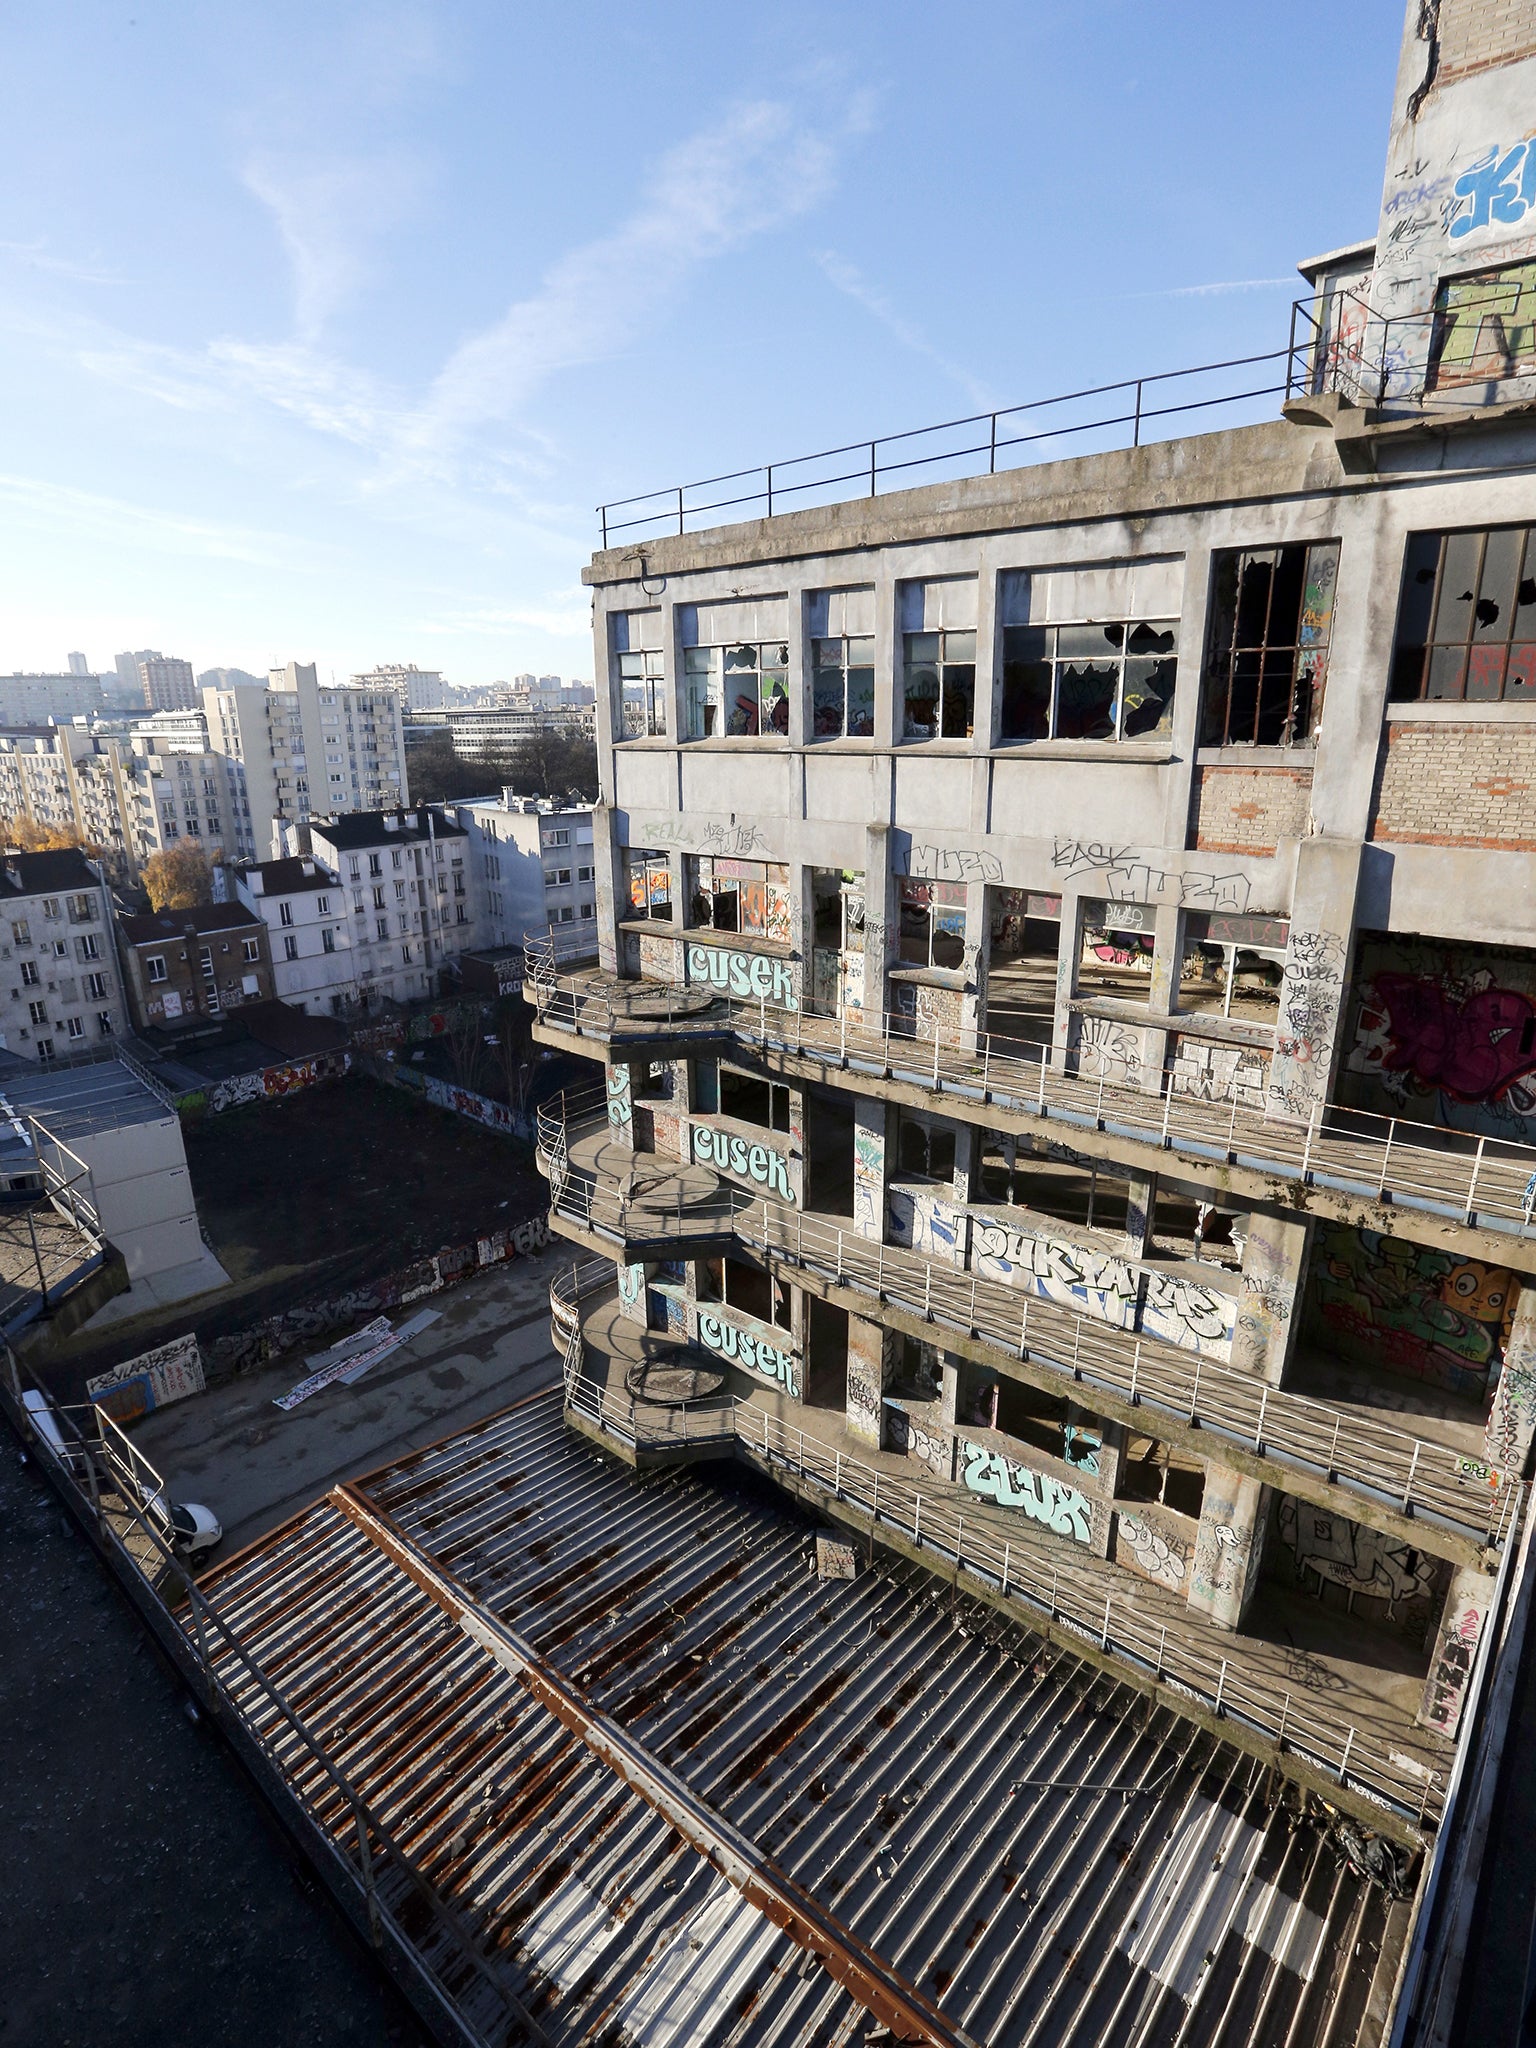 The Magasins Generaux building in the Parisian suburb of Pantin (Getty Images)